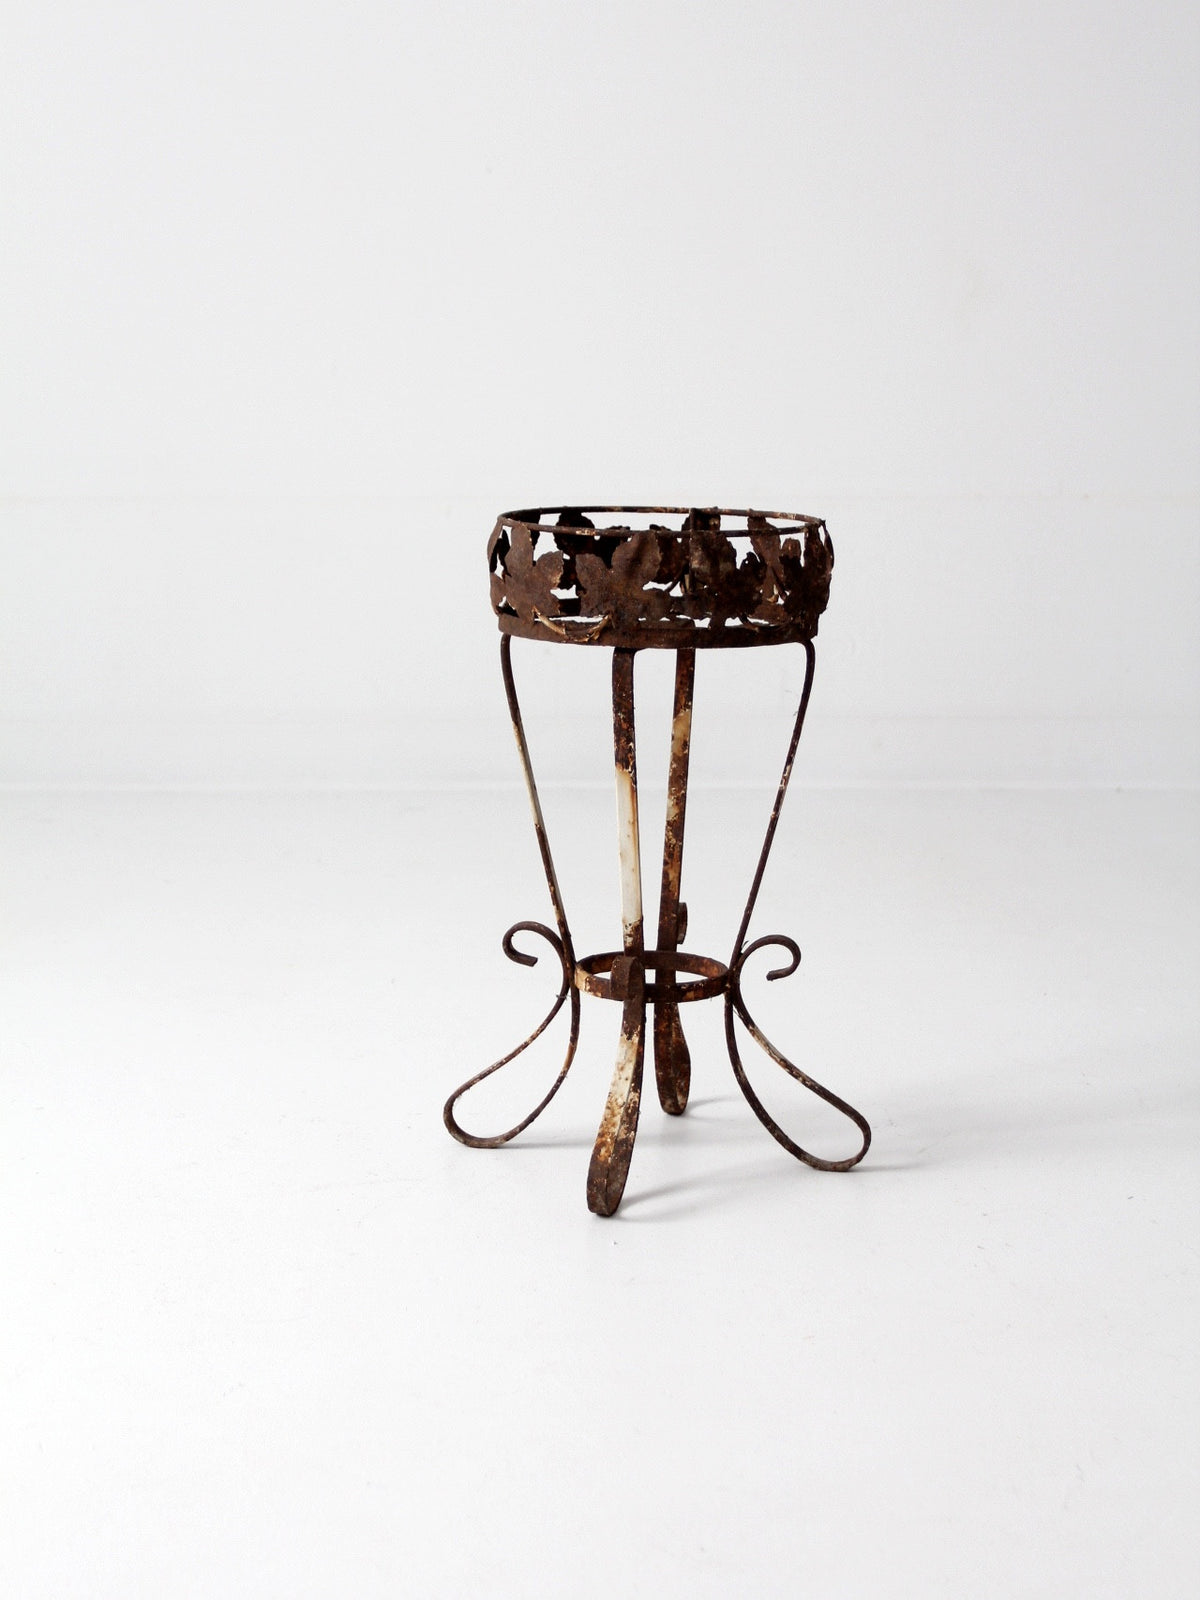 Lot - VINTAGE CAST IRON PLANT STAND Mid-20th Century Height 30.5”. Top  11.25” x 11.25”.